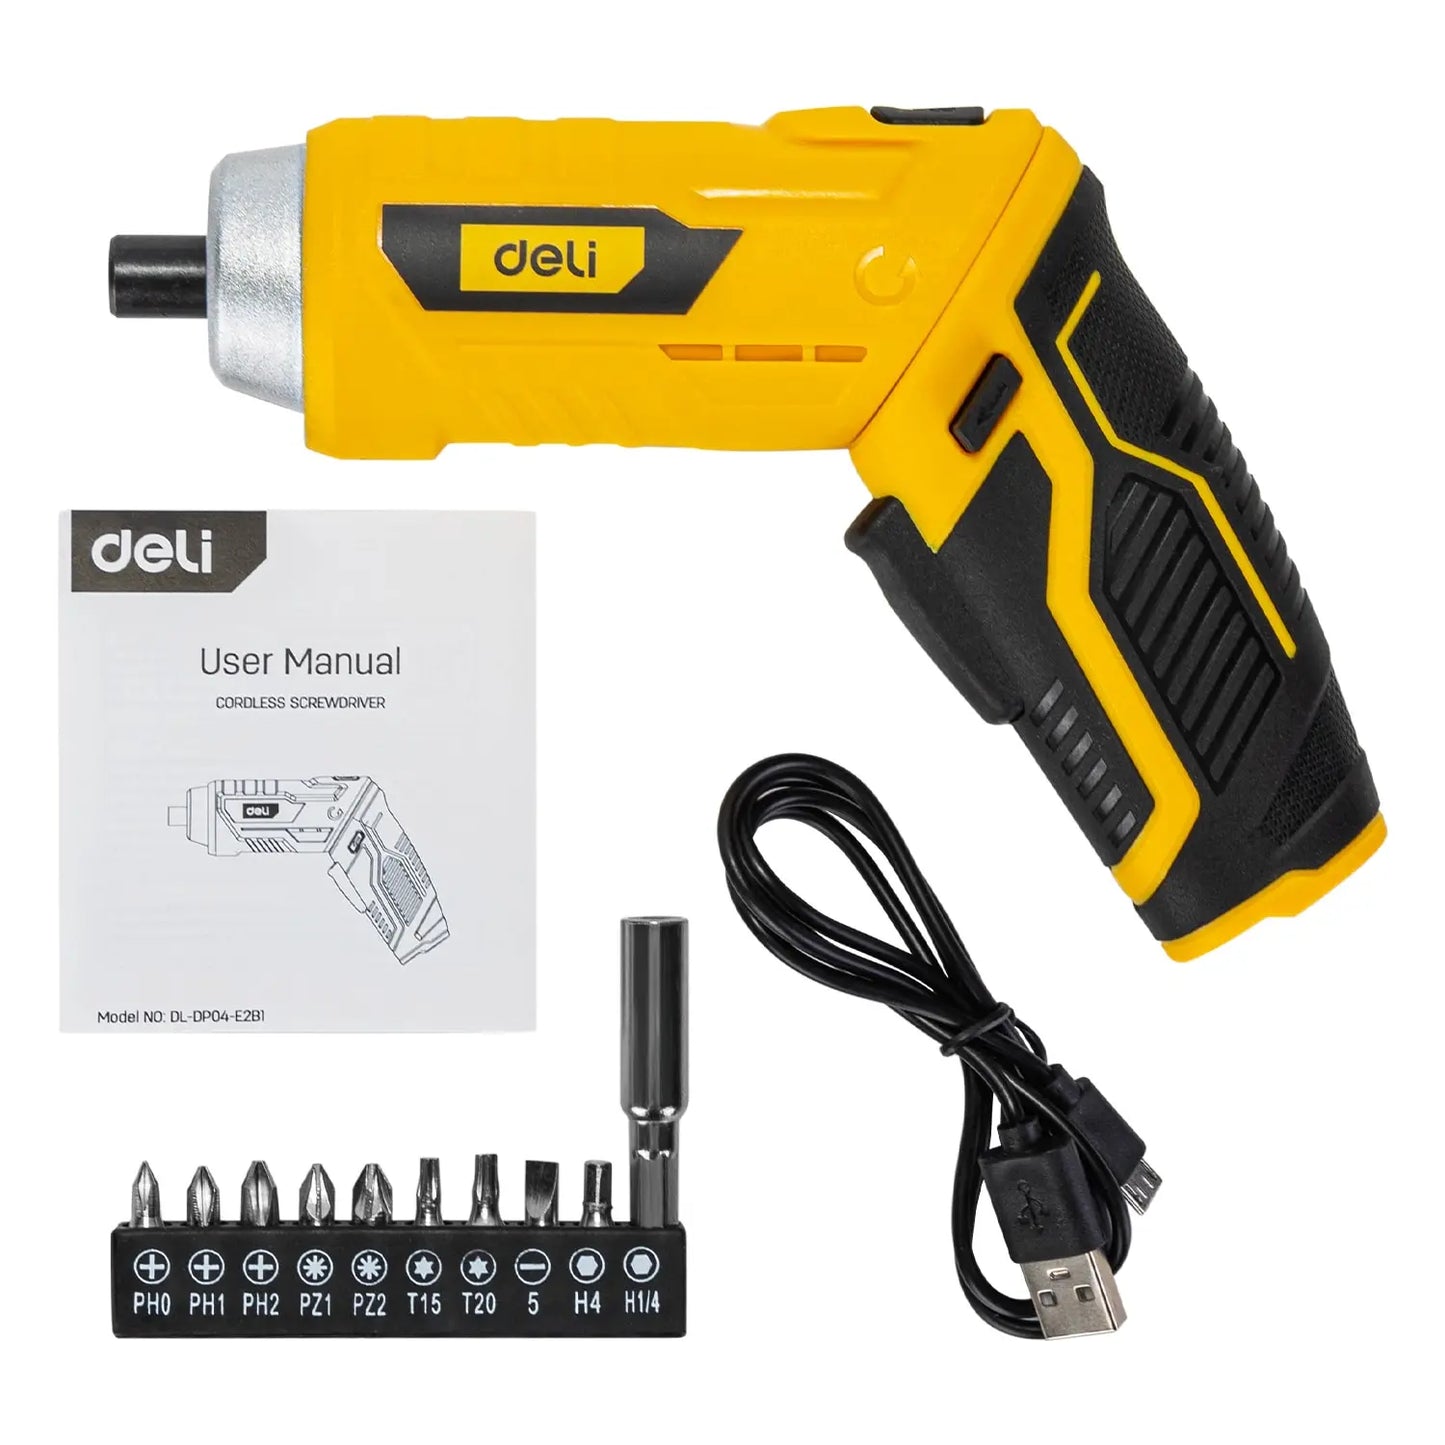 Deli 3.6V Electric Screwdriver Rechargeable Disassembling Machine Assembly Repair Tool LED Work Light 4 Speed Control